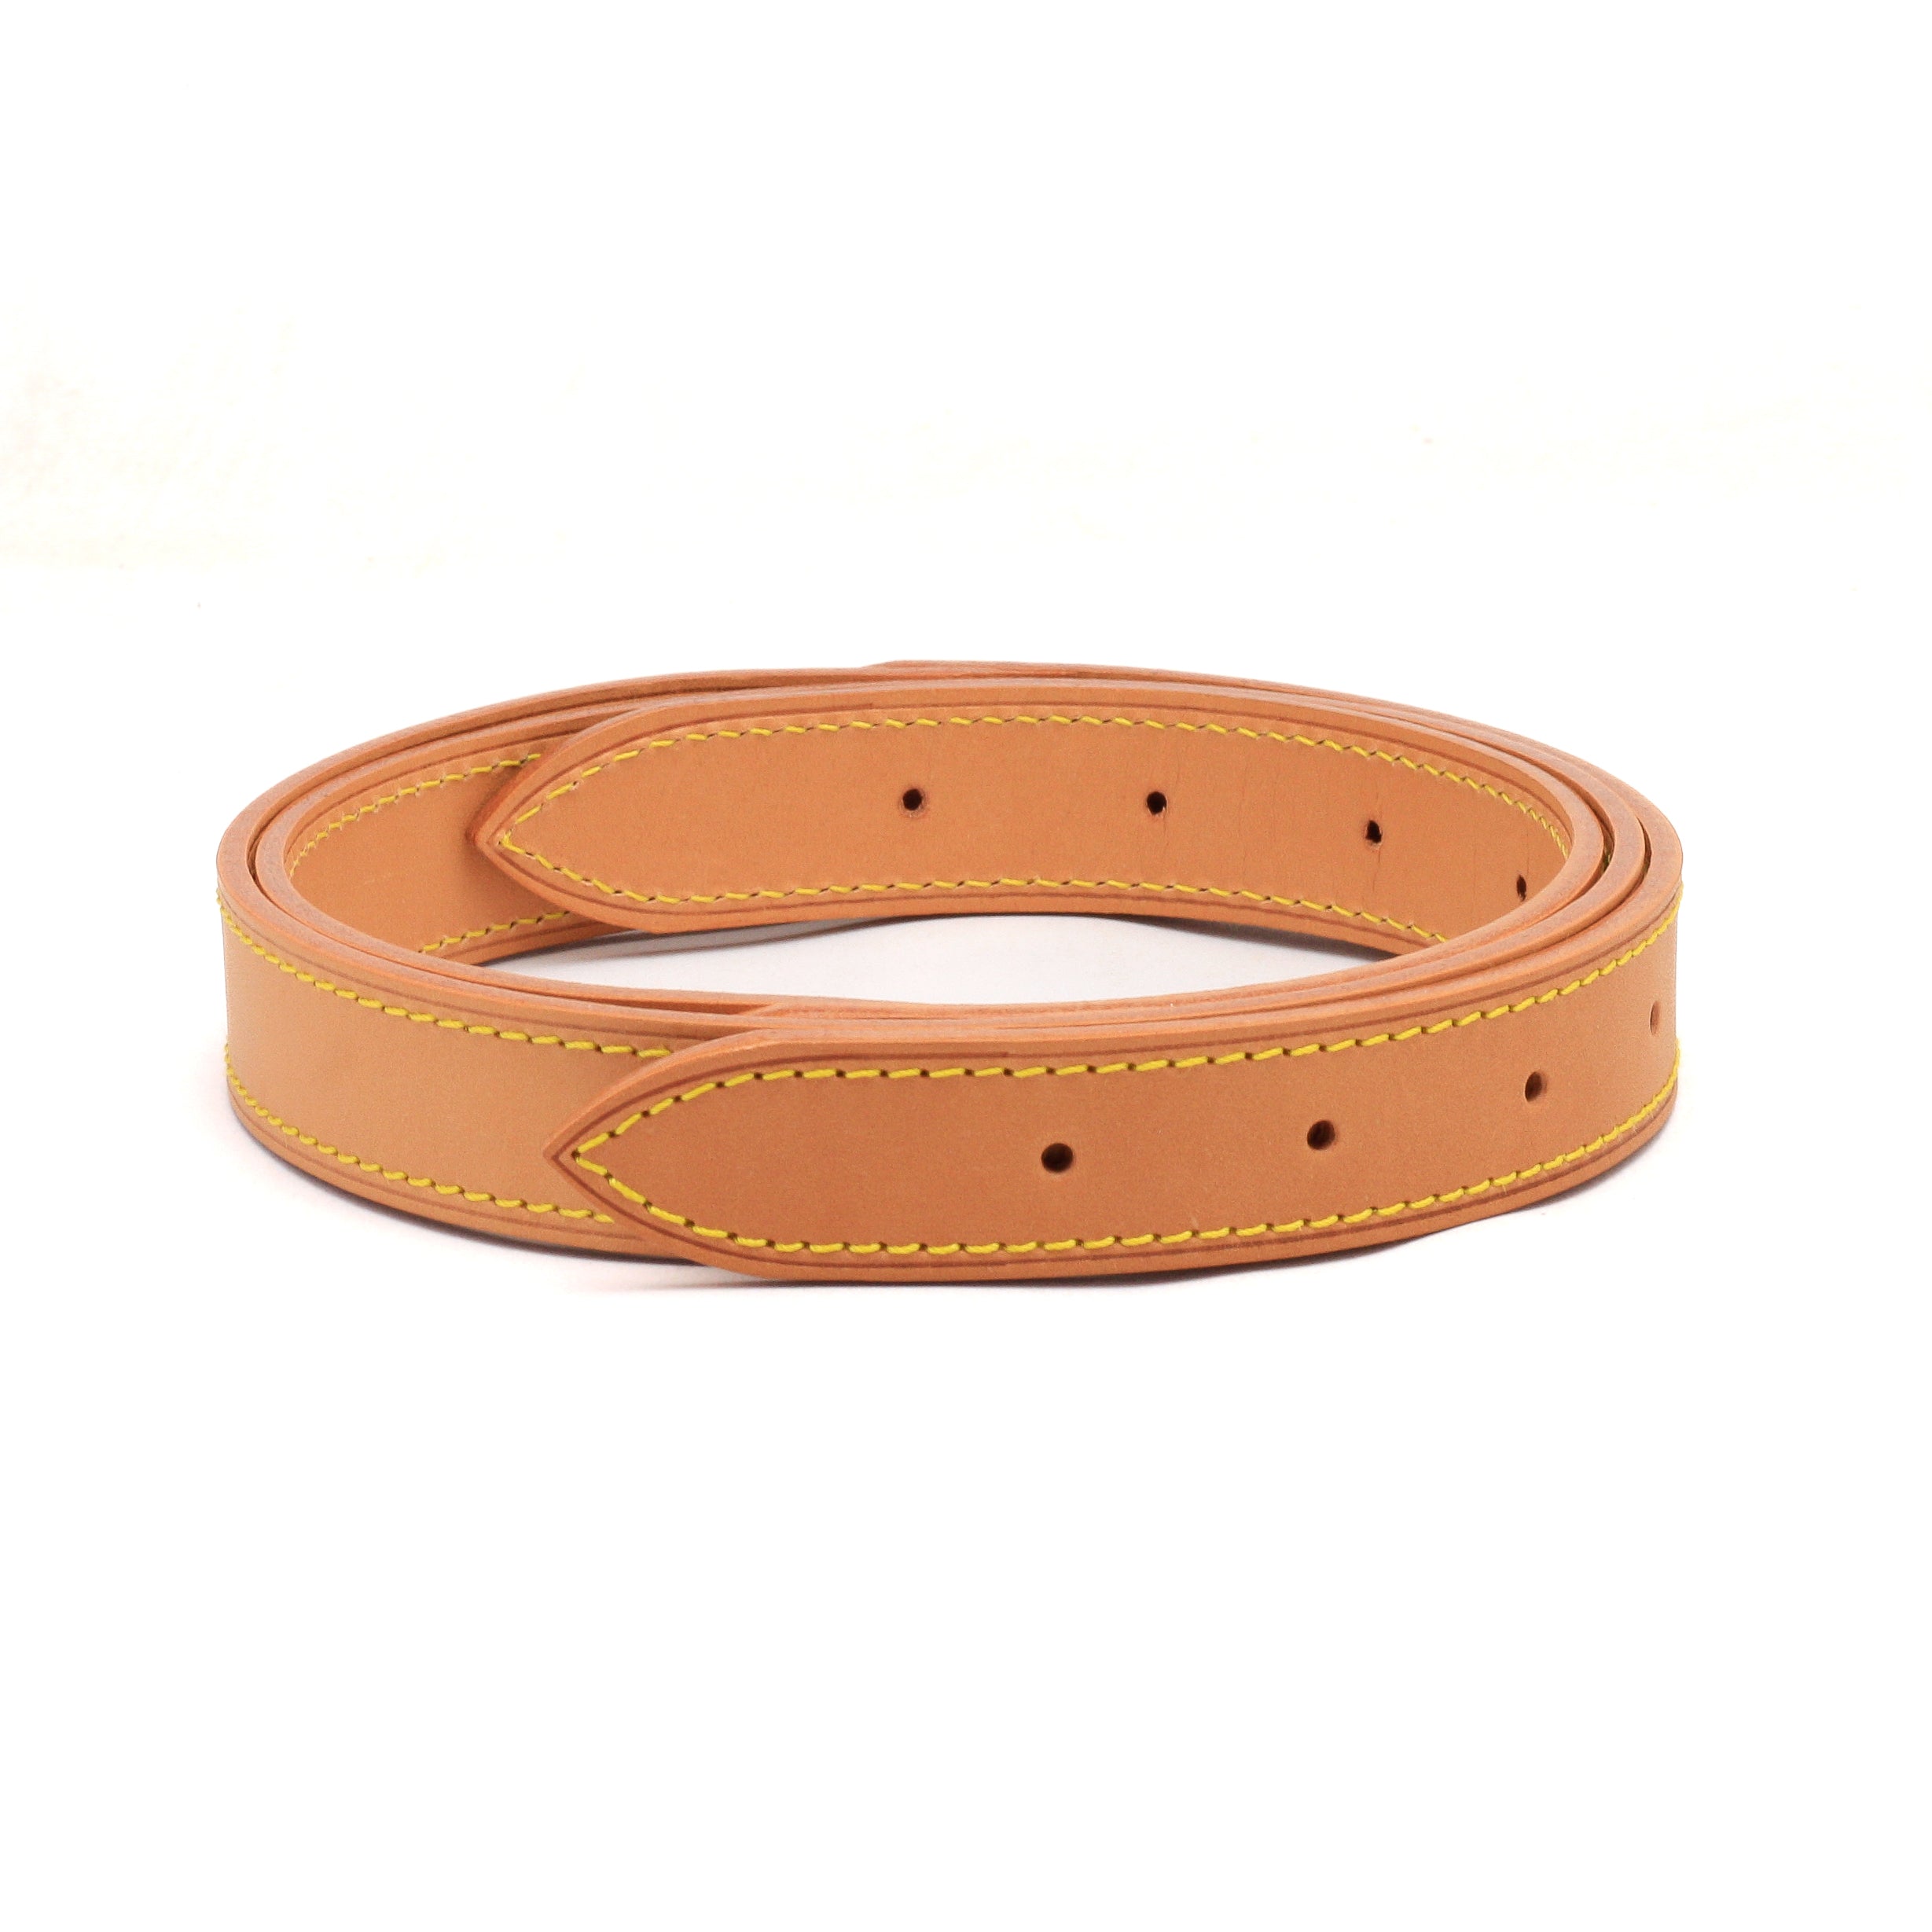  Non Tanned Vachetta Leather bandouliere Strap for Keep